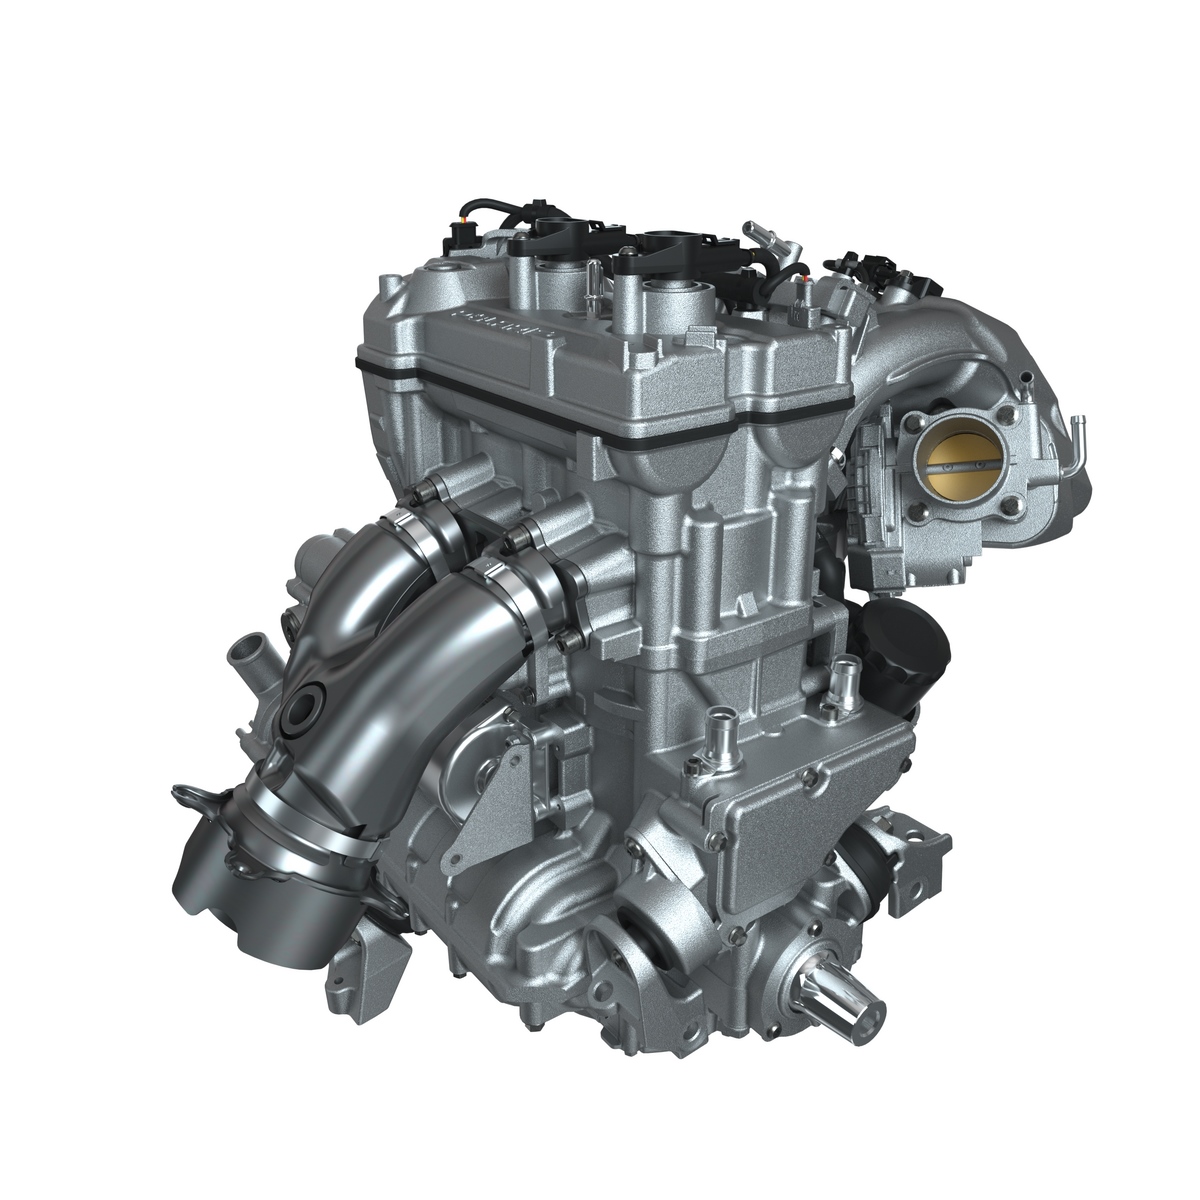 All 4-stroke engine options for 2023